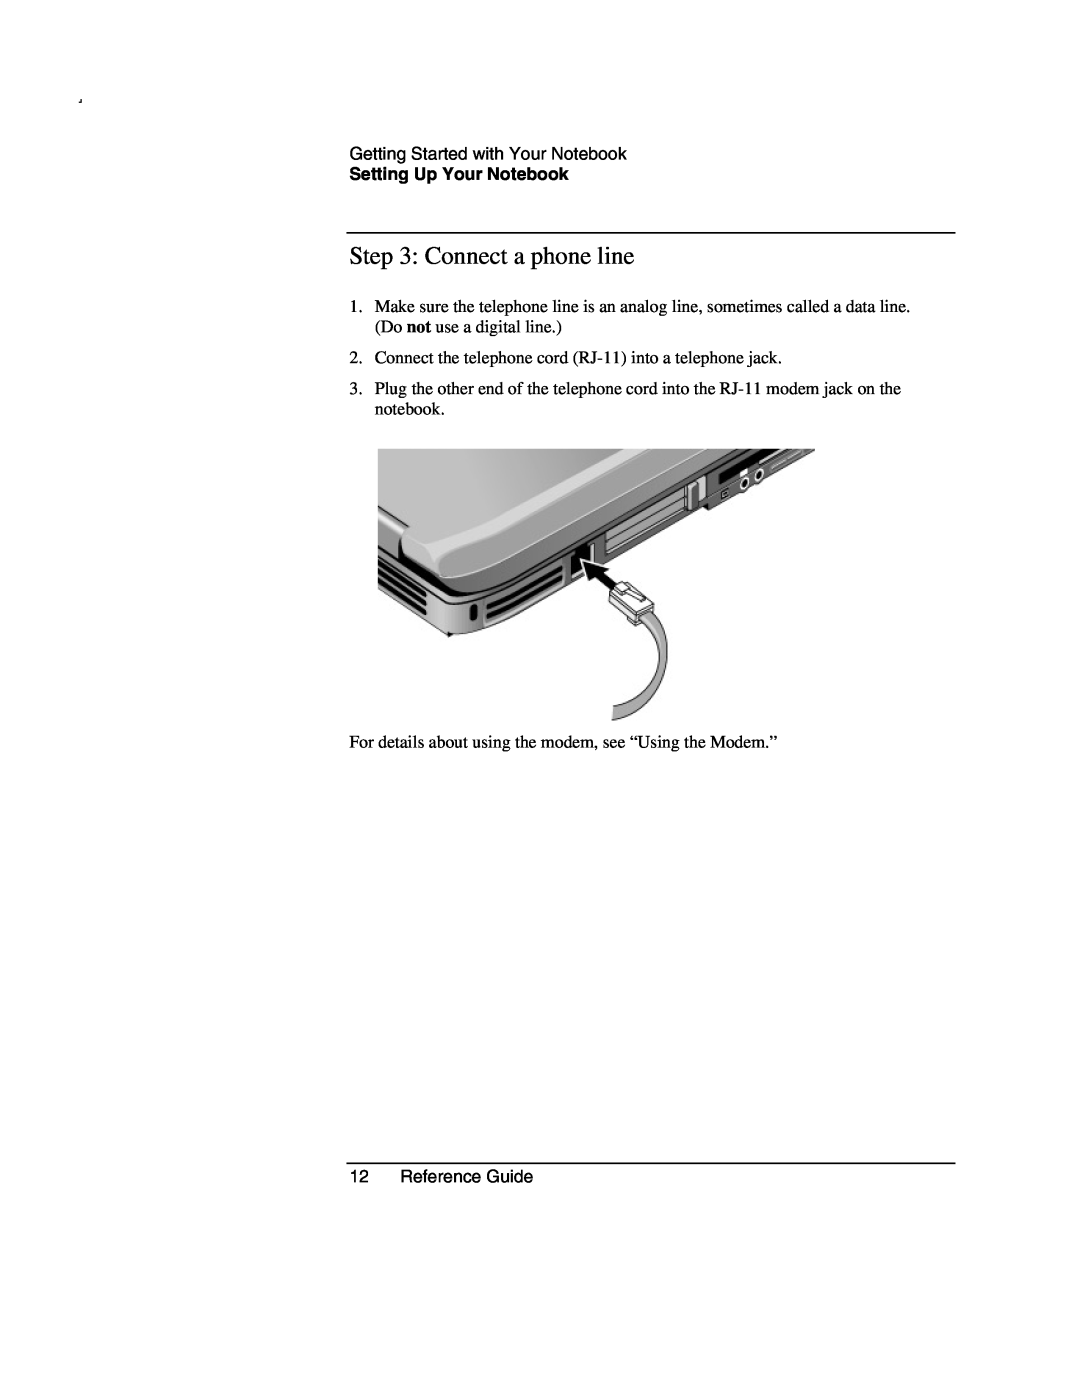 Compaq AMC20493-KT5 manual Connect a phone line, Setting Up Your Notebook 